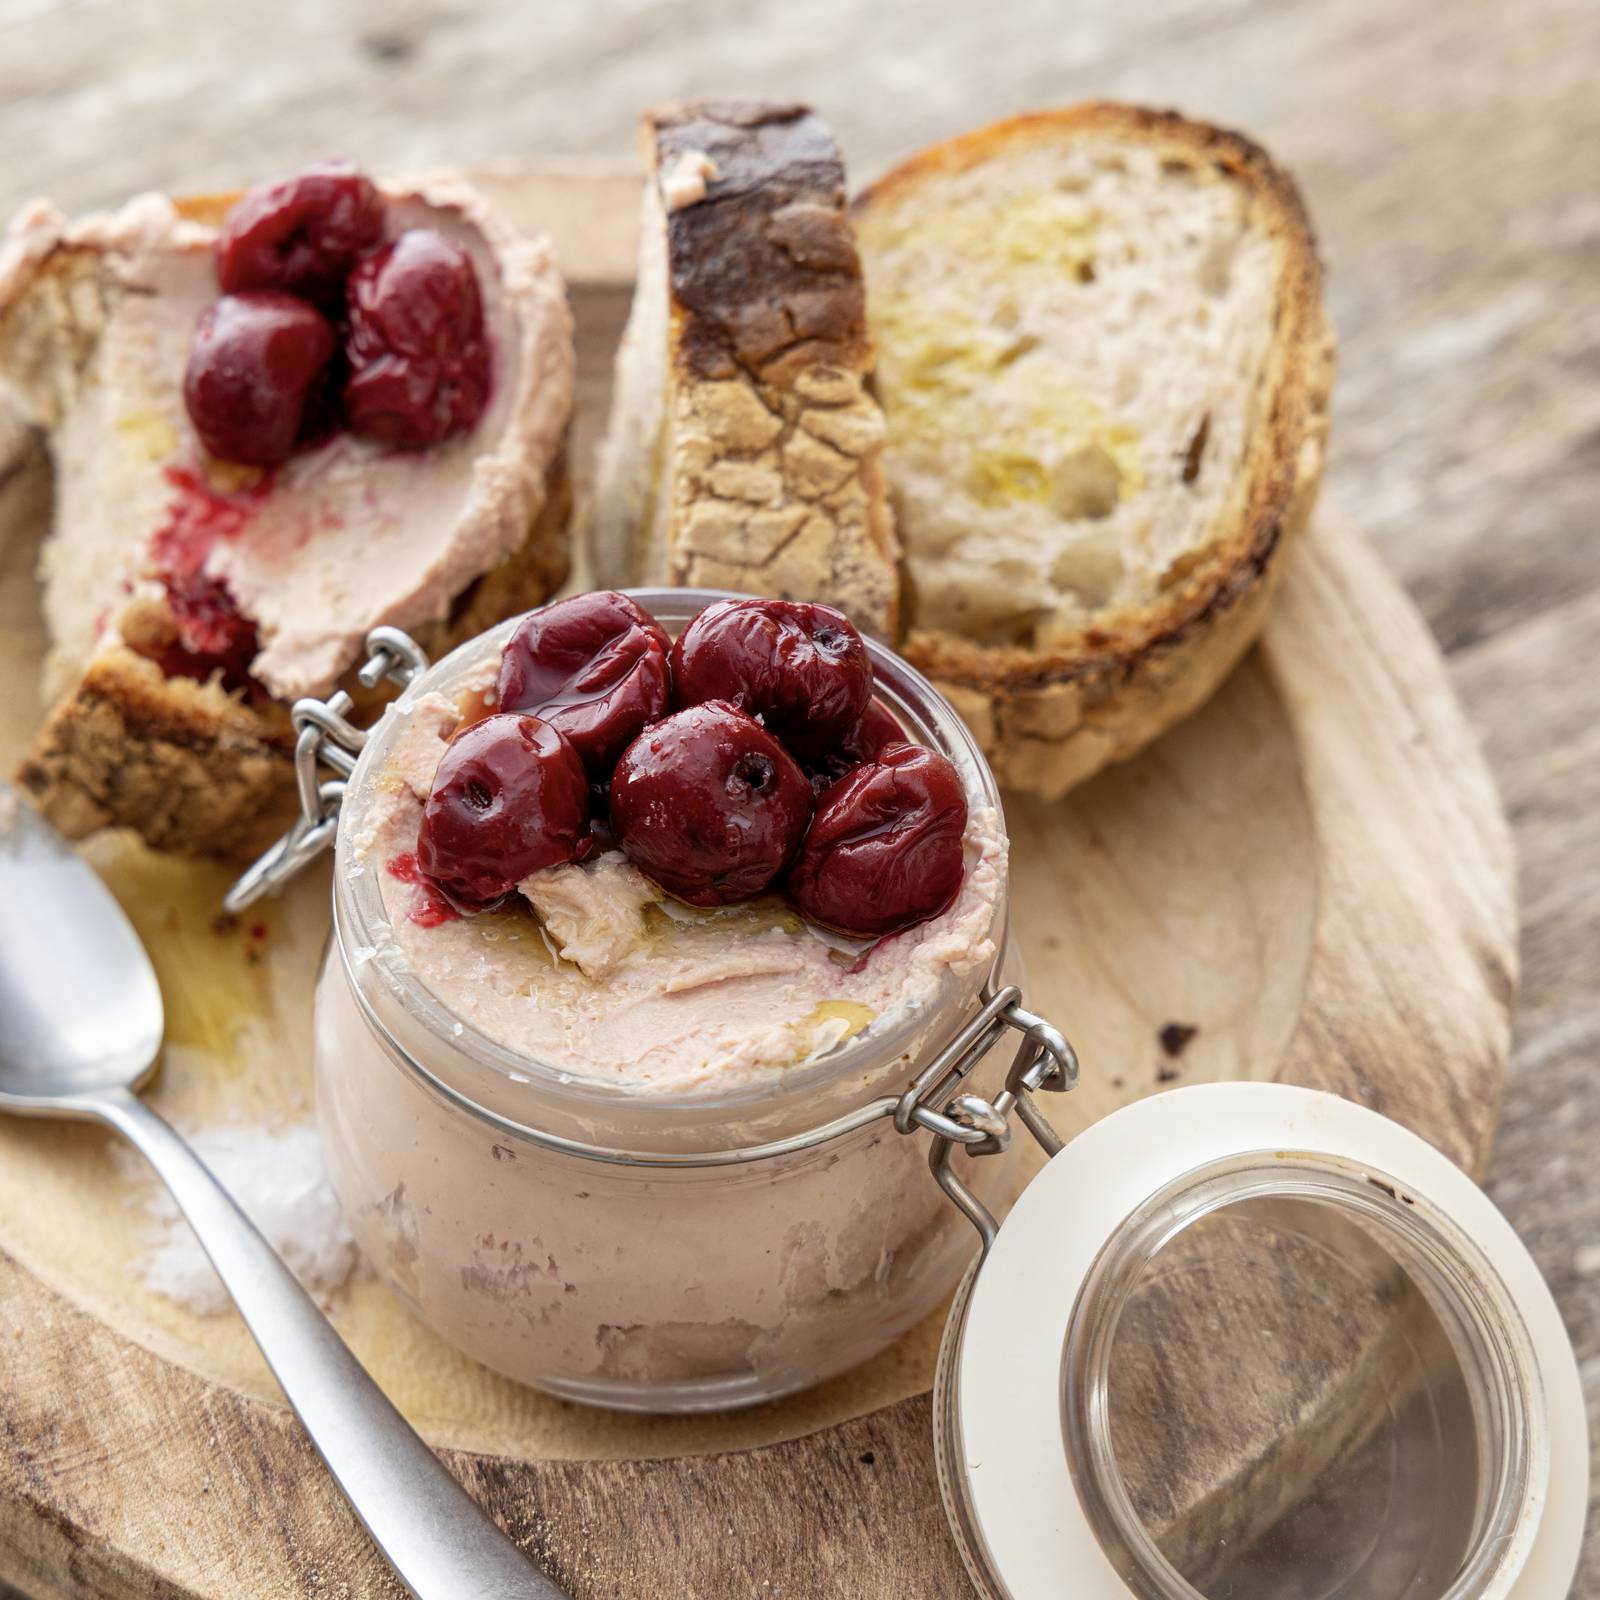 Chicken liver parfait with macerated cherries – The Irish Times